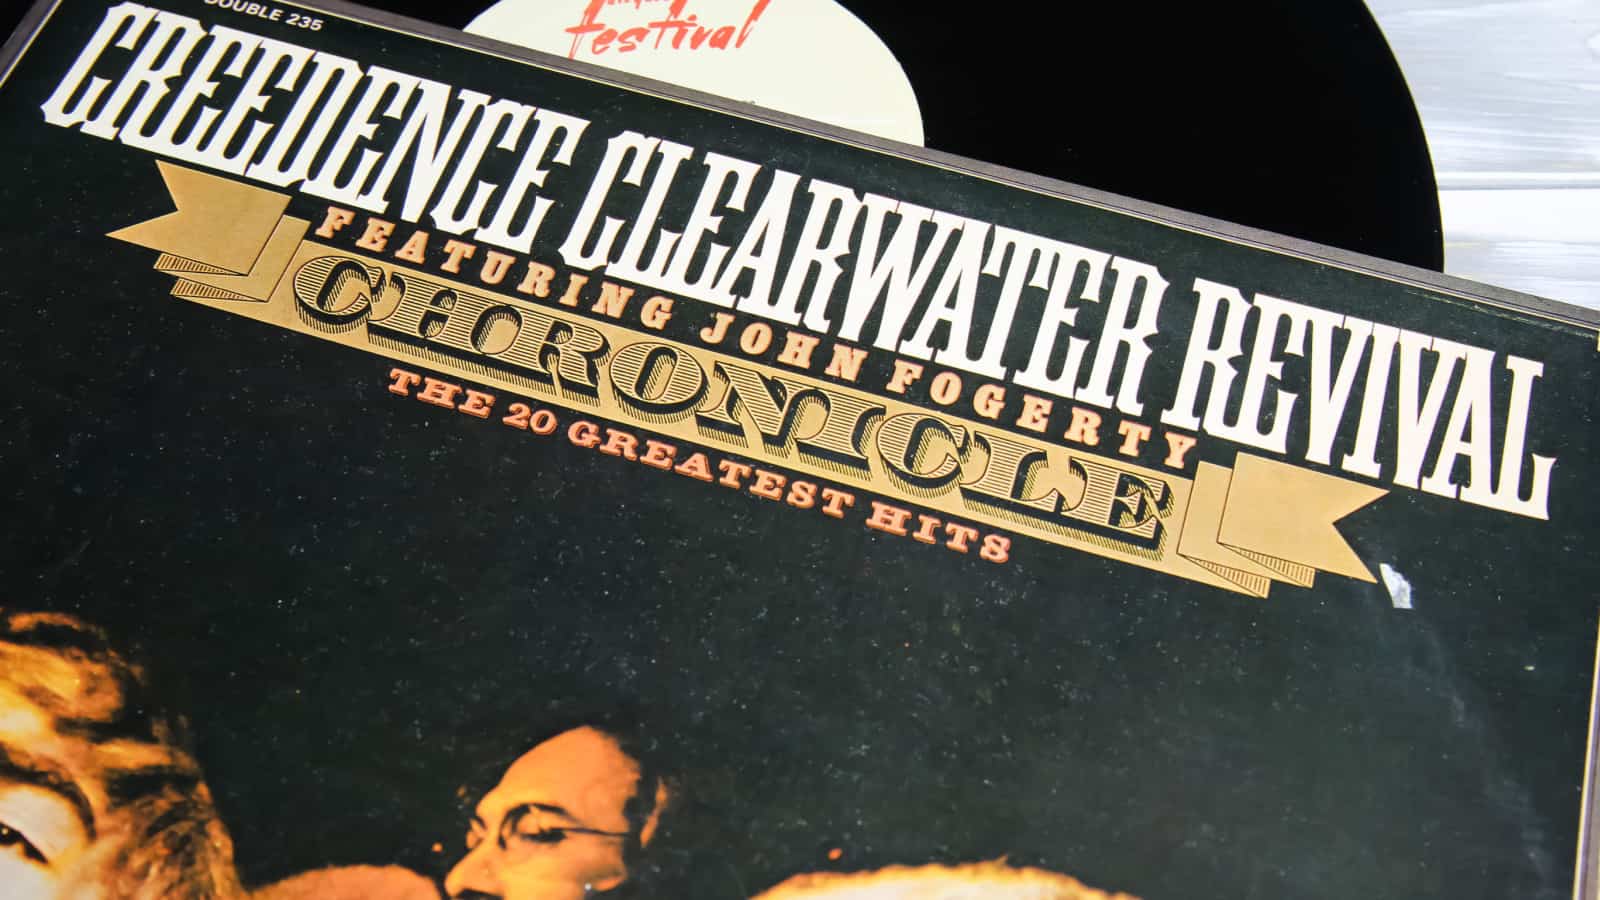 Cover of Creedence Clearwater Revival record